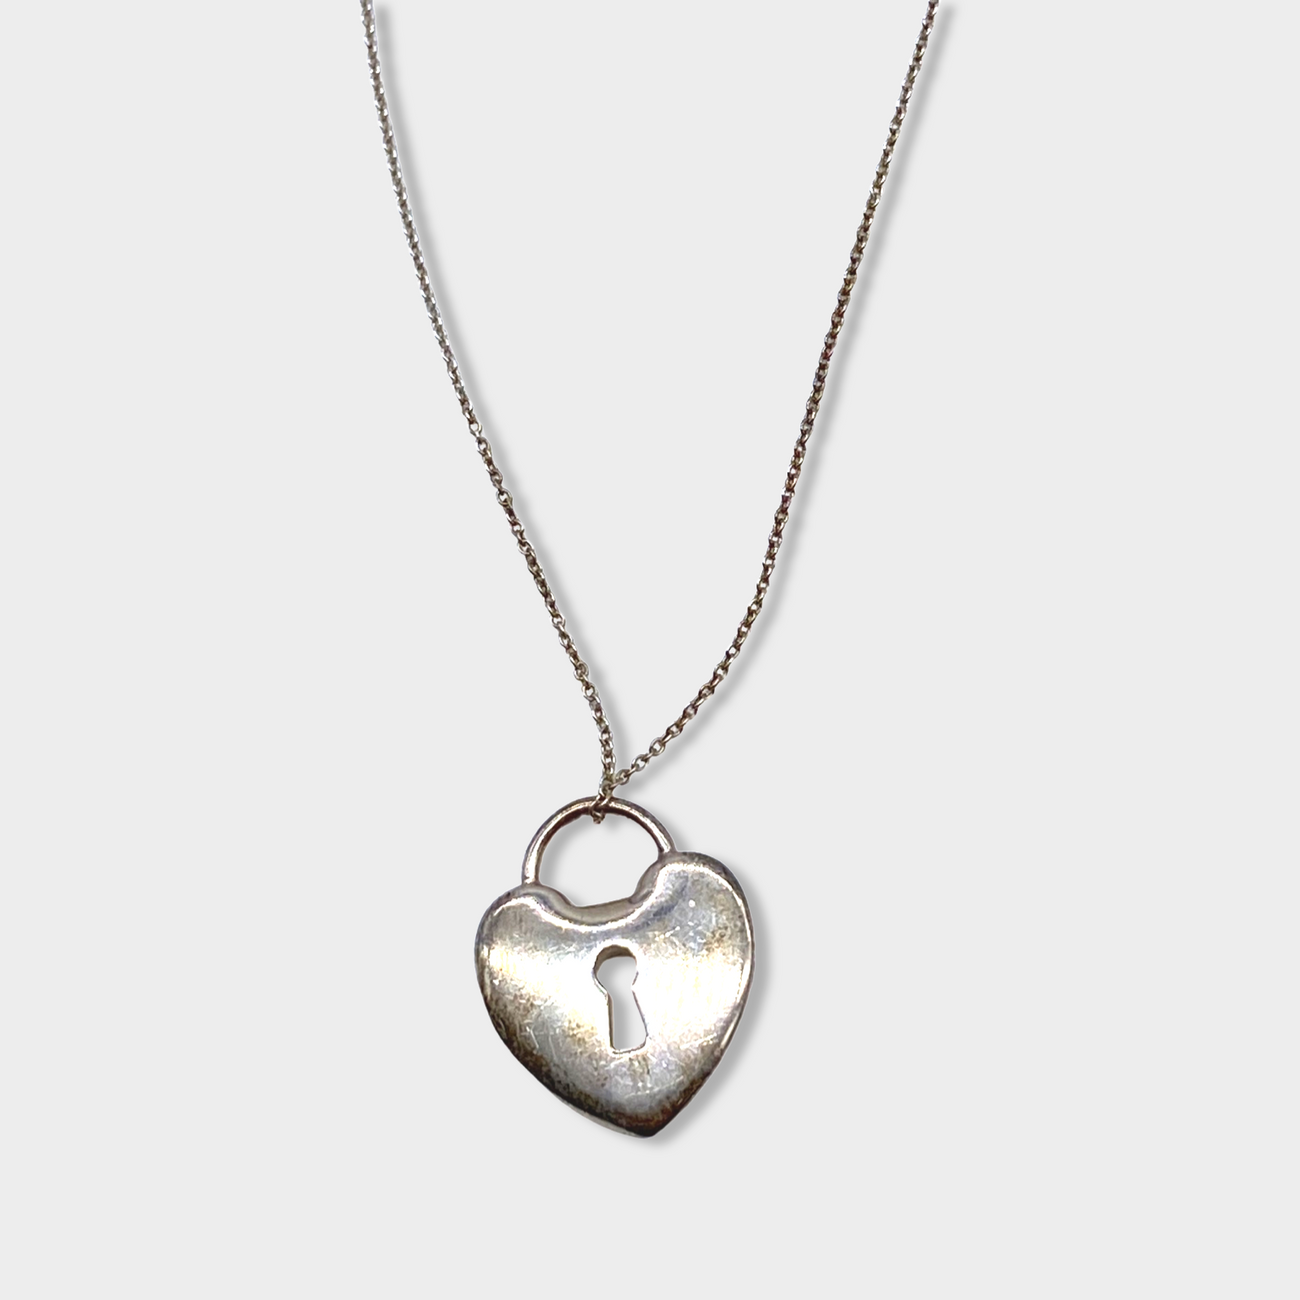 Authentic Tiffany & Co. Elsa Peretti Large Open Sterling Silver Heart Pendant  Necklace, Tiffany Co 925 Silver Big Puffed Heart on Long Chain - Etsy Israel